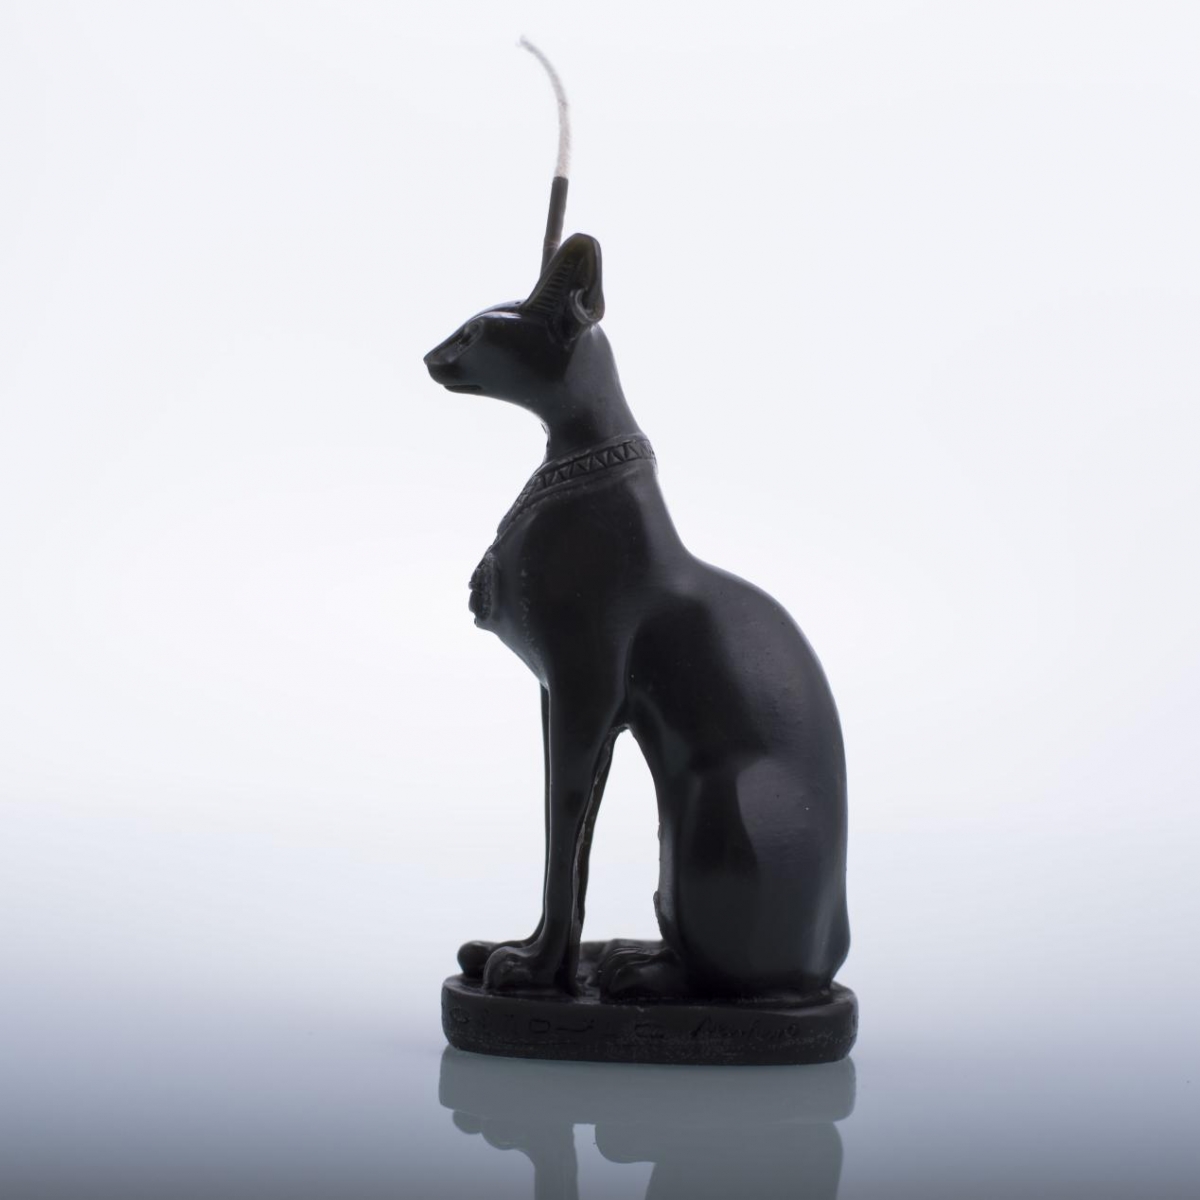 Bastet Cat Candles：Egyptian Cat Goddess ,Black Color ,Sculpture Candle ,Beeswax ,3 D,Ritual ,Friendly ,China Factory ,Best Price-HOWCANDLE-Candles,Scented Candles,Aromatherapy Candles,Soy Candles,Vegan Candles,Jar Candles,Pillar Candles,Candle Gift Sets,Essential Oils,Reed Diffuser,Candle Holder,